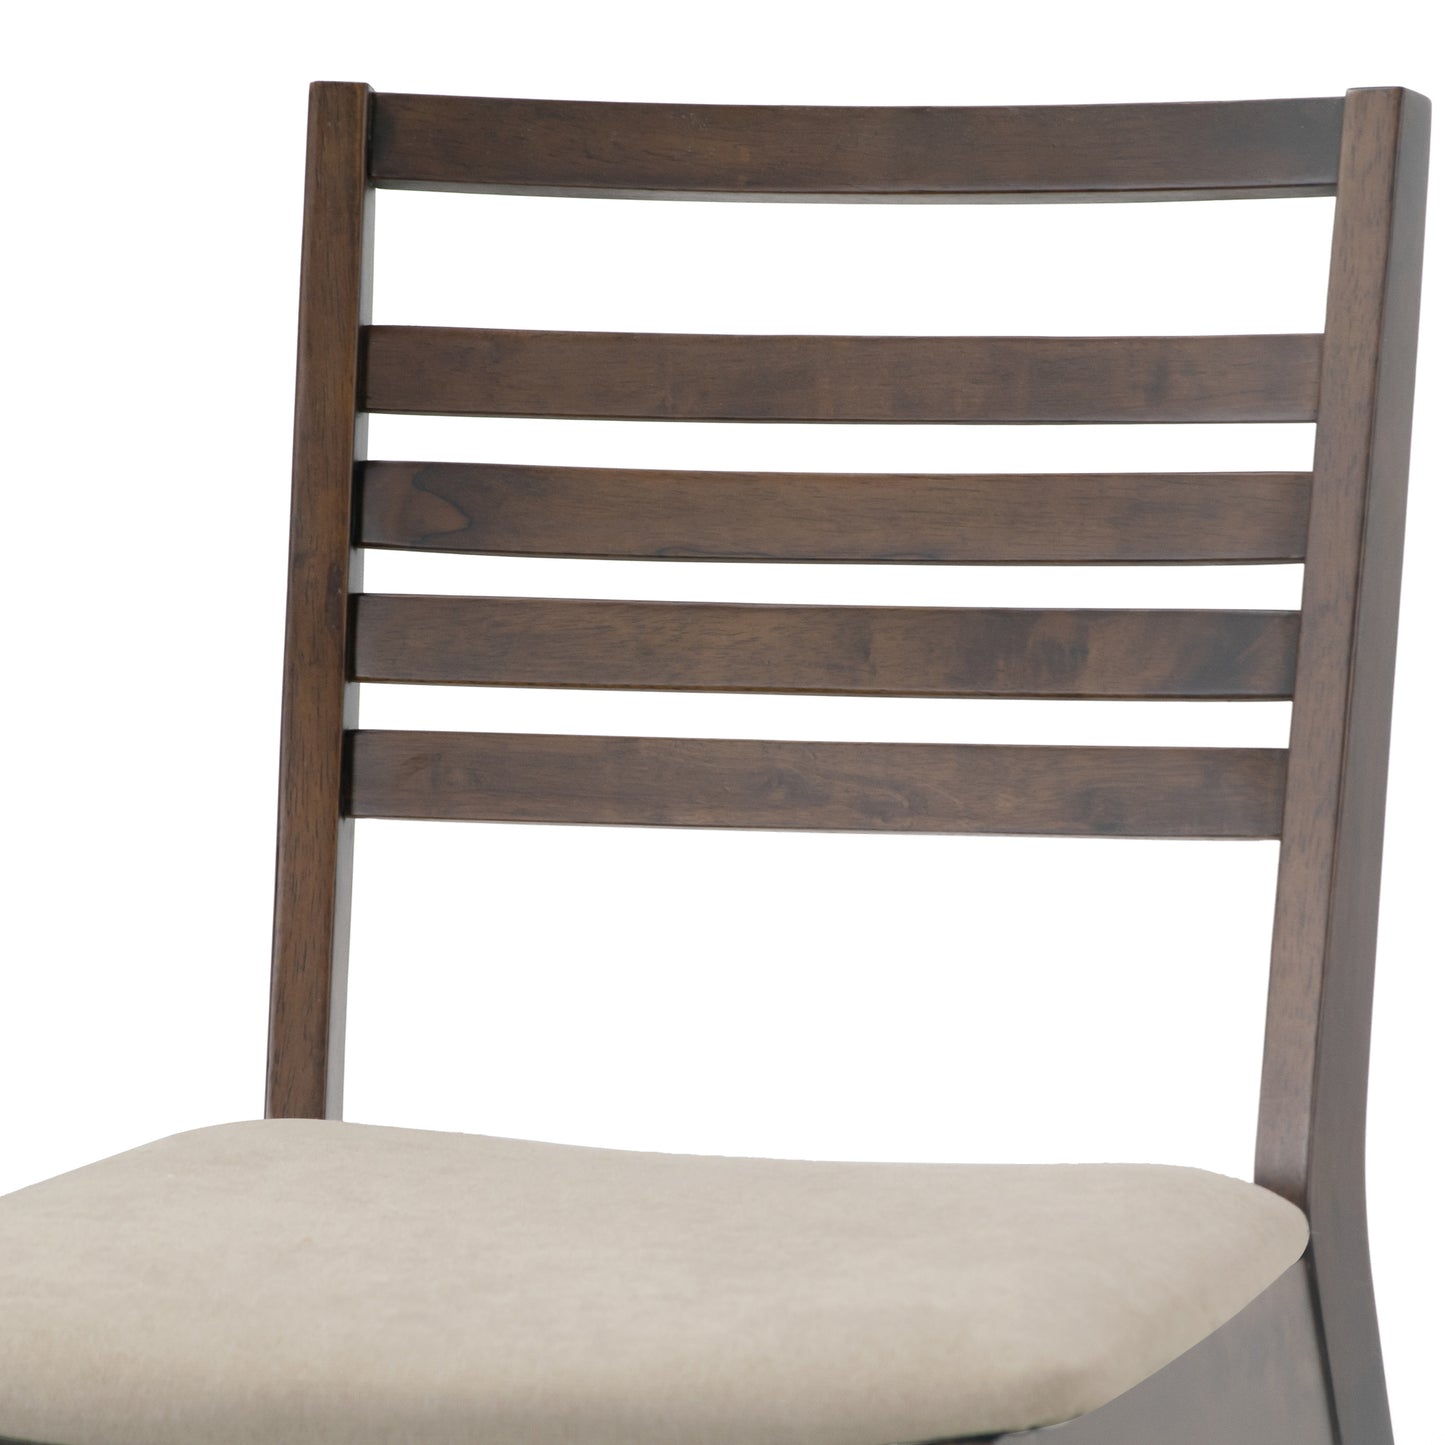 Set of 2 Audrey Dark Brown Wood Chair with Beige Fabric Seat and Ladder Back